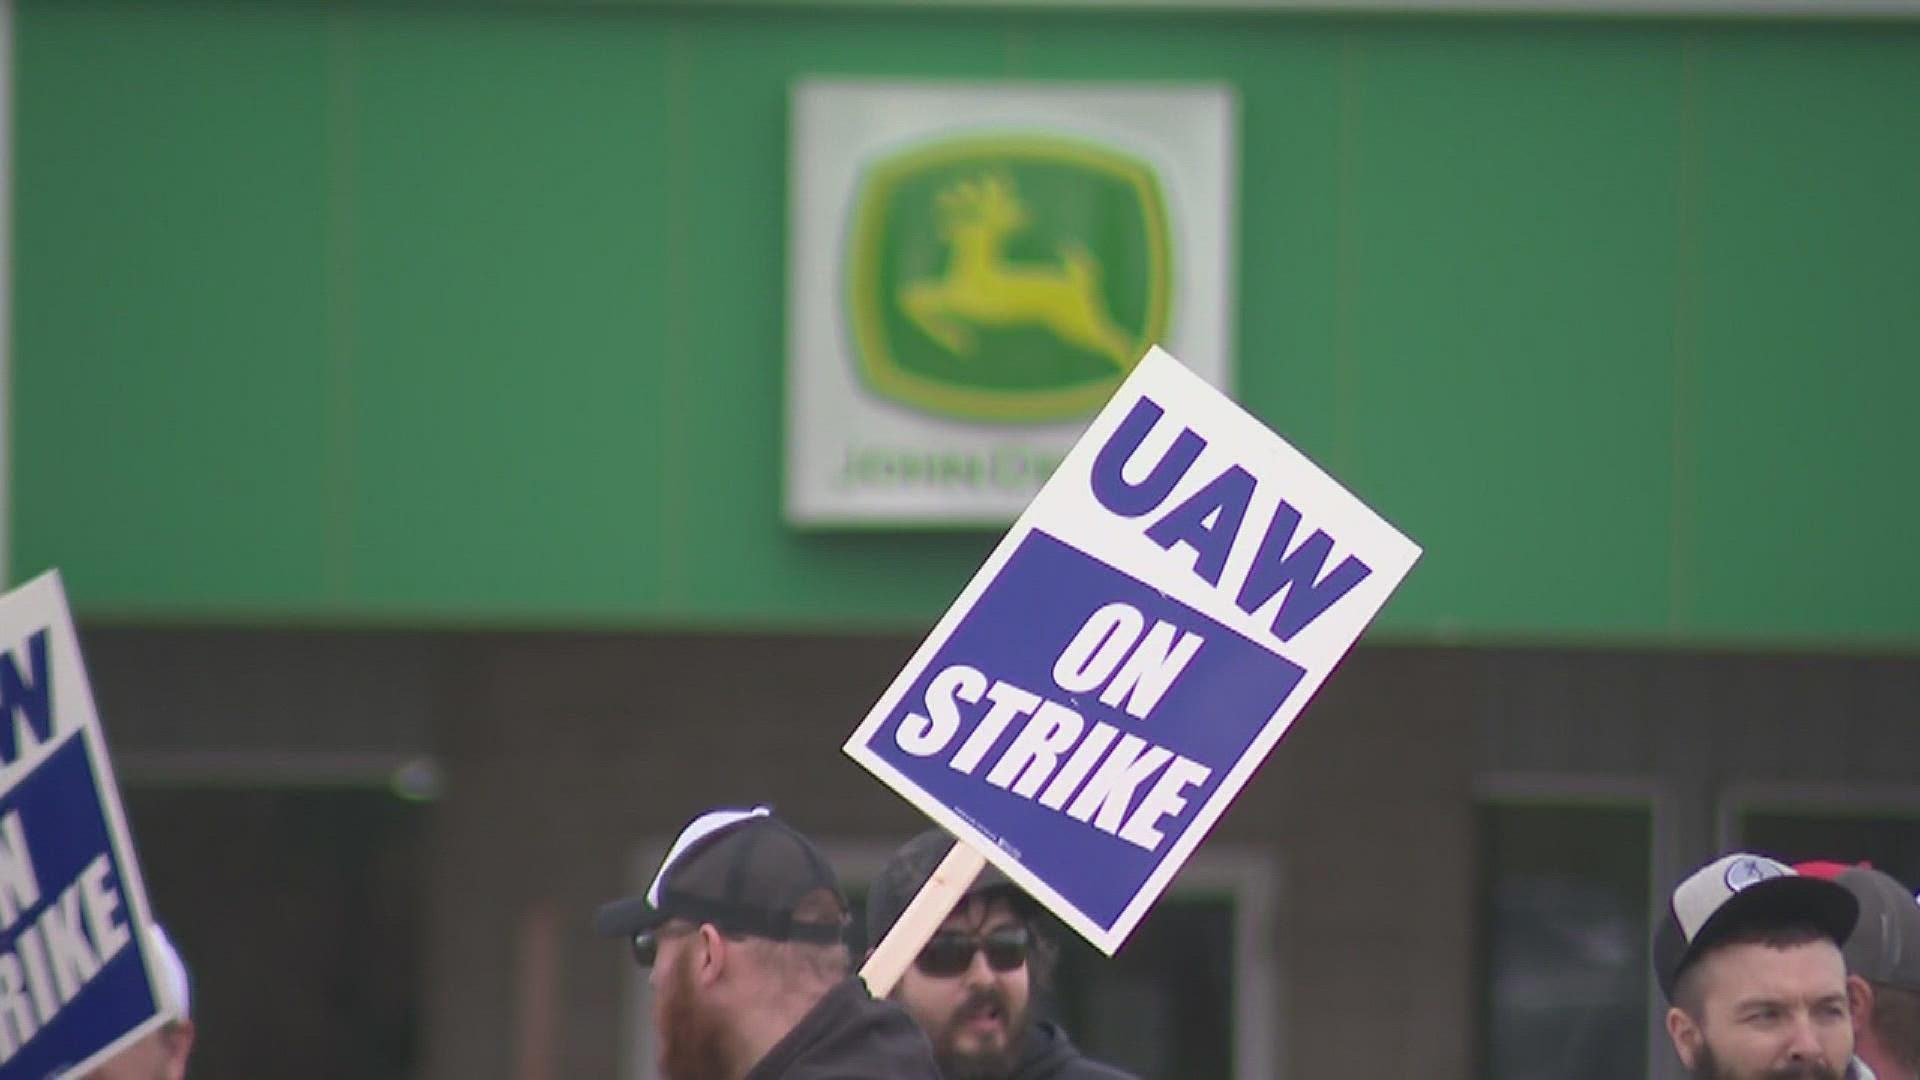 The union members are asking for an increase in benefits including post-retirement health care and better pension plans